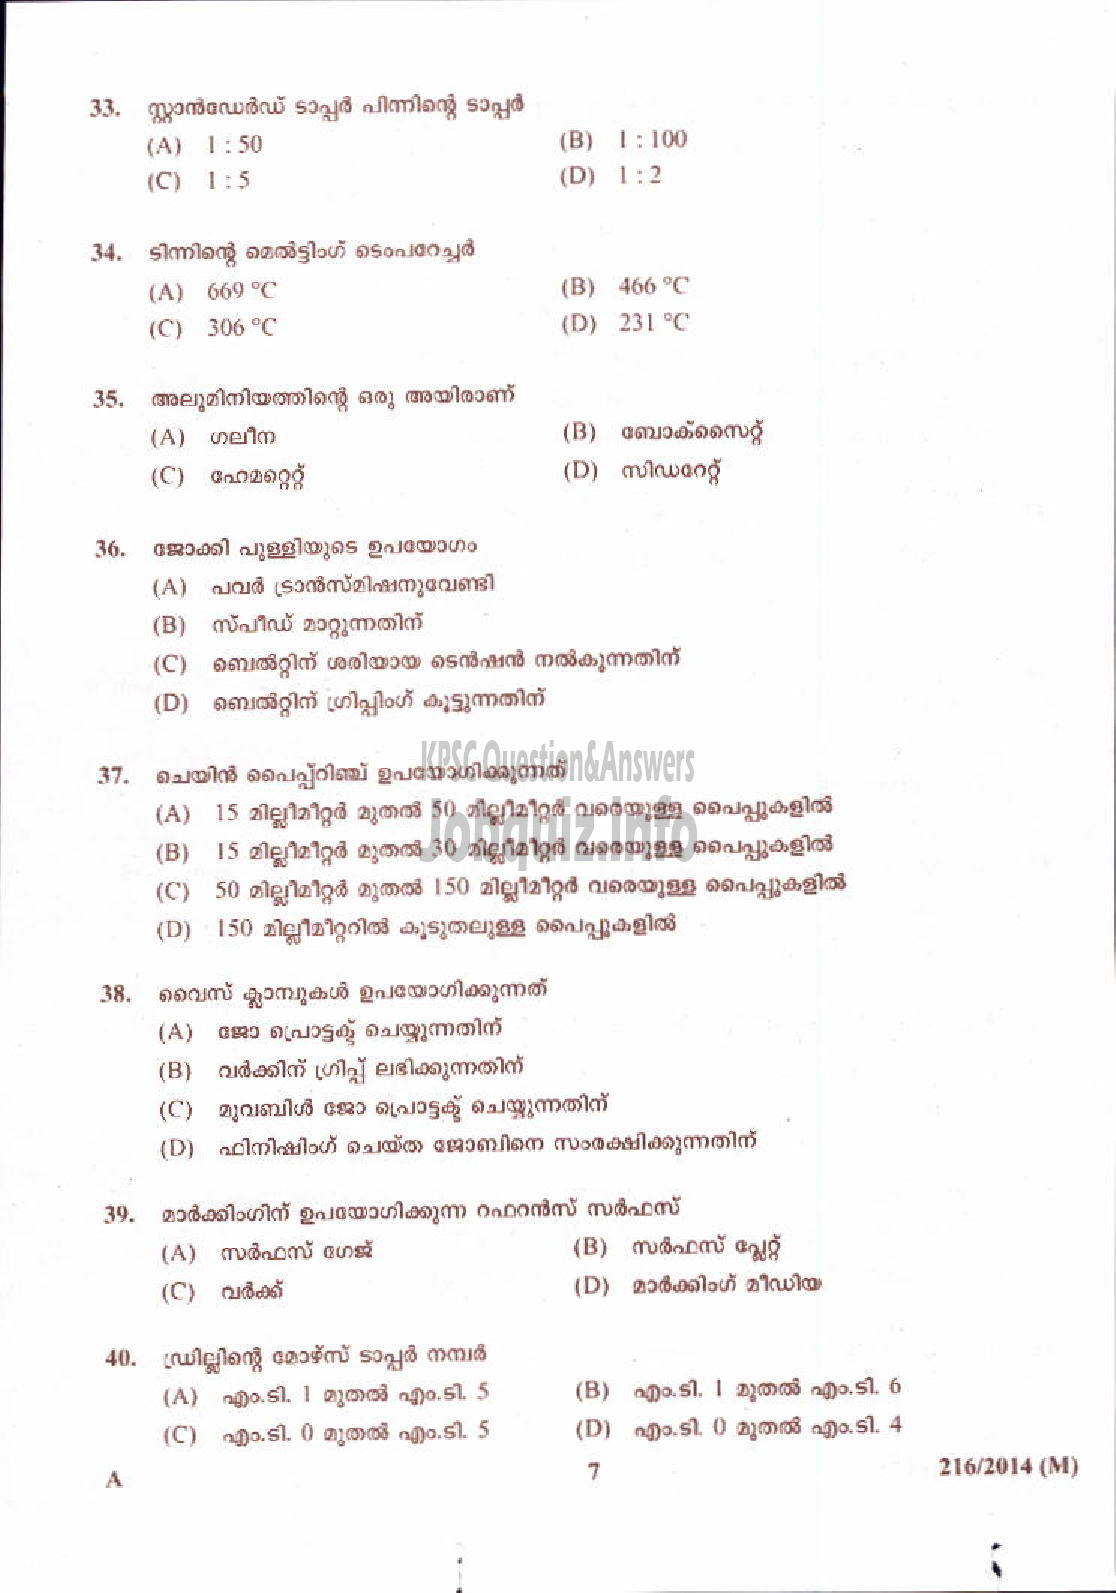 Kerala PSC Question Paper - FITTER AGRICULTURE-7